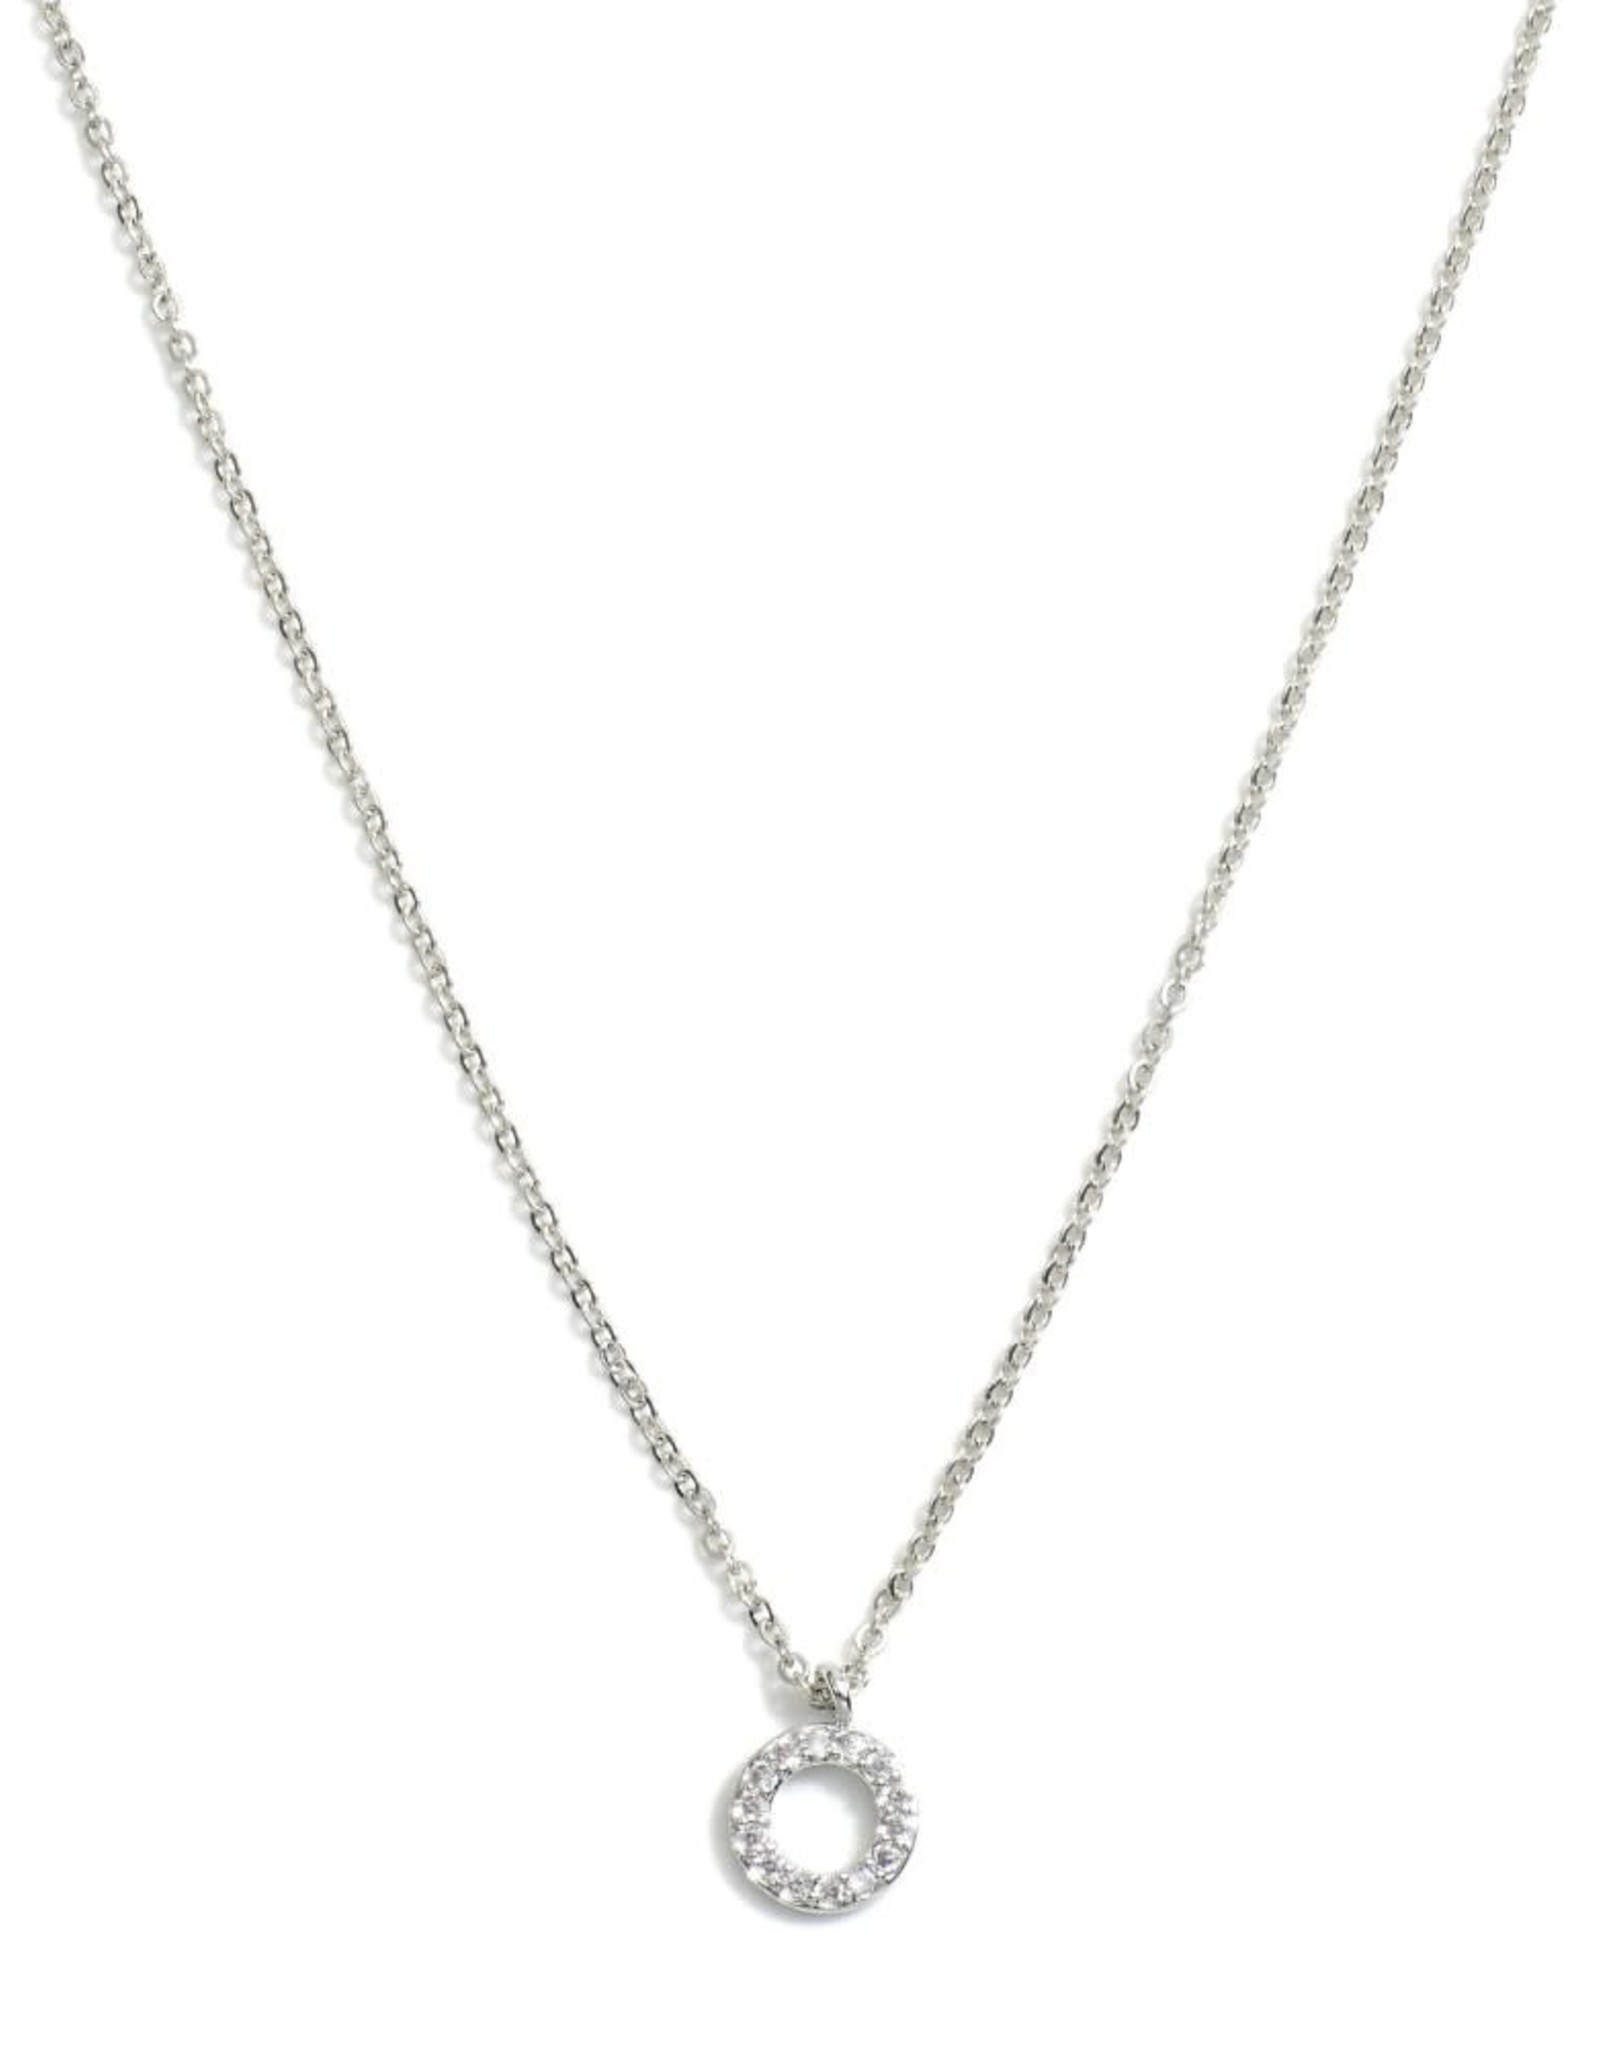 judson 152942 - Dainty Chain Link Pendant Necklace Featuring Circular Premium Cubic Zirconia   - Approximately 15" L - Extender 2" L Silver